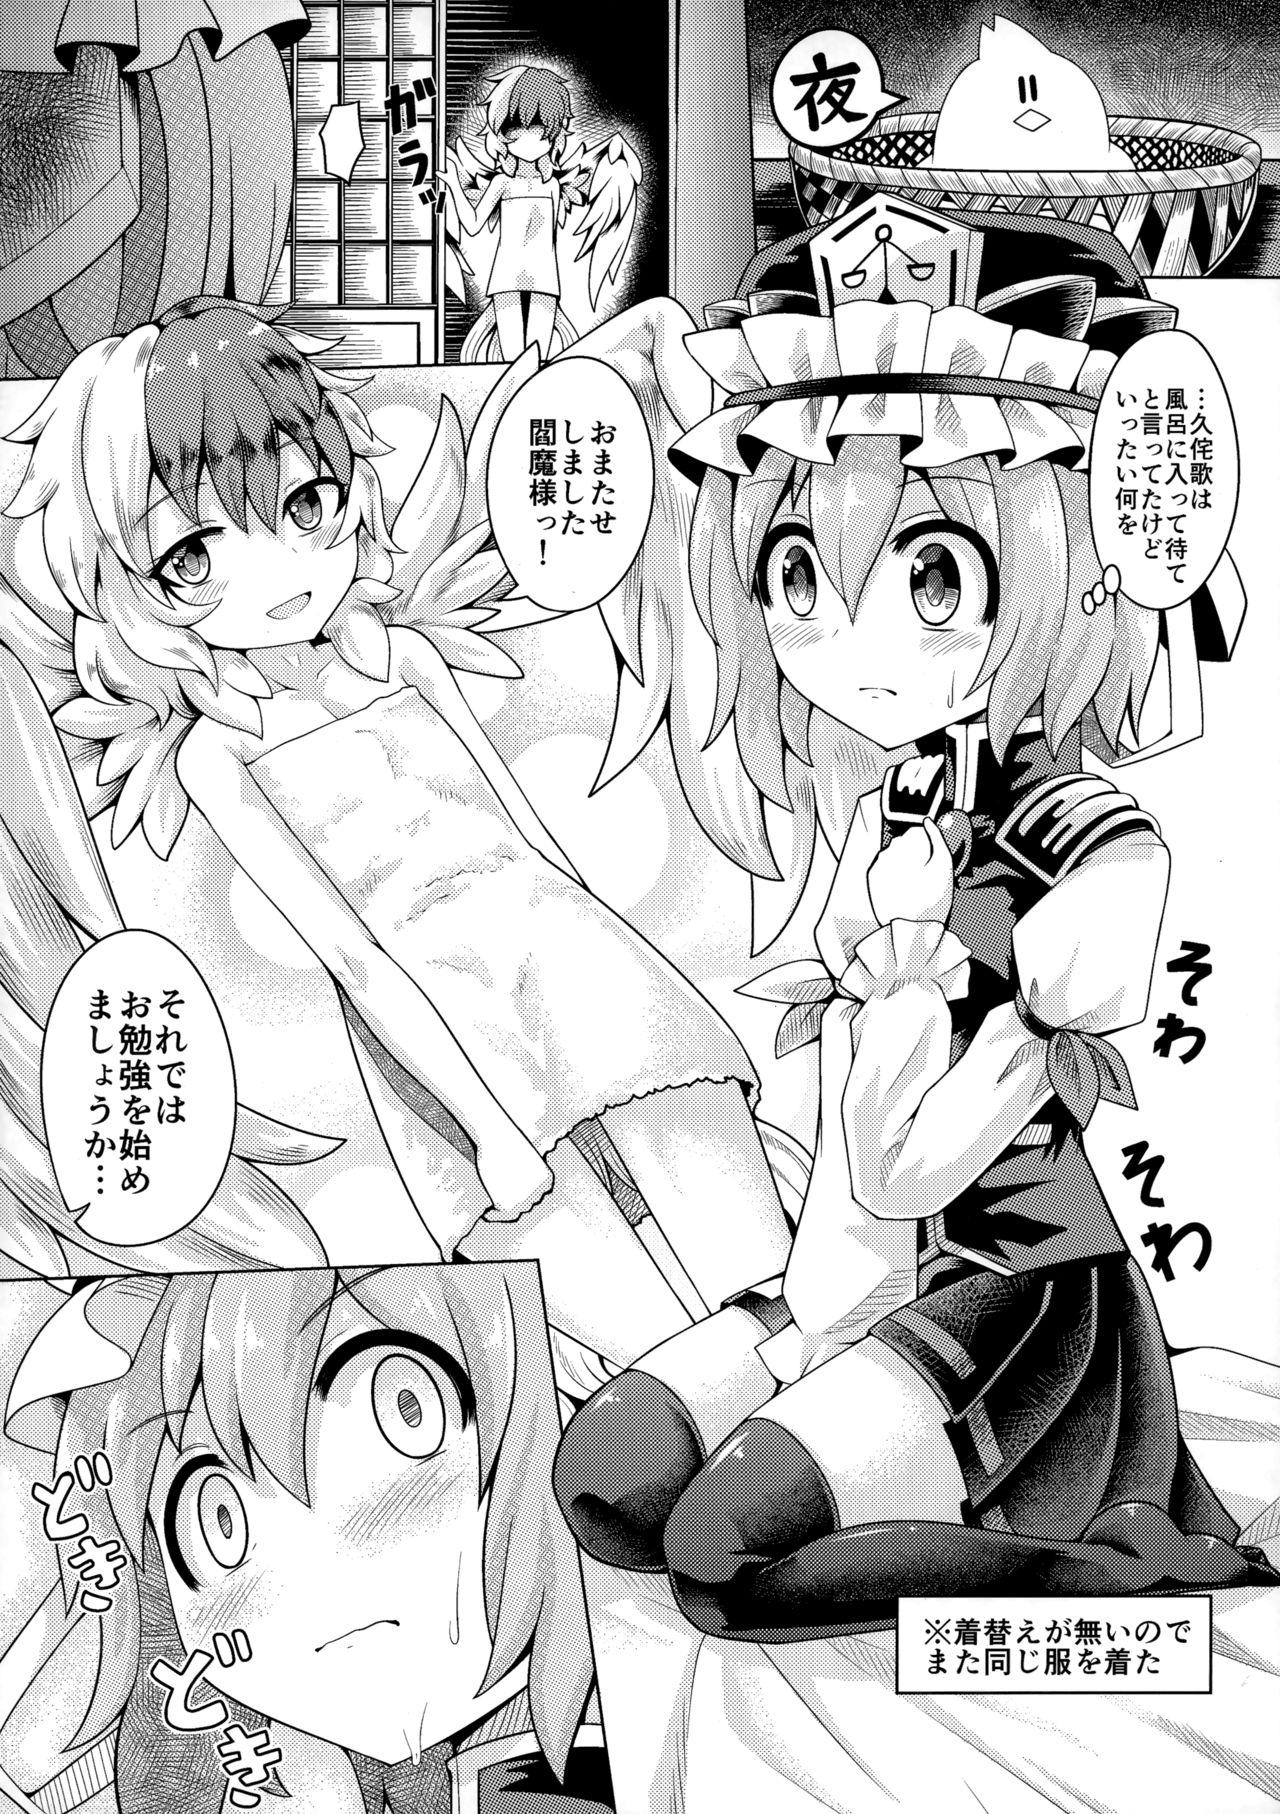 Handjob Reverse Sexuality 9 - Touhou project Tease - Page 5